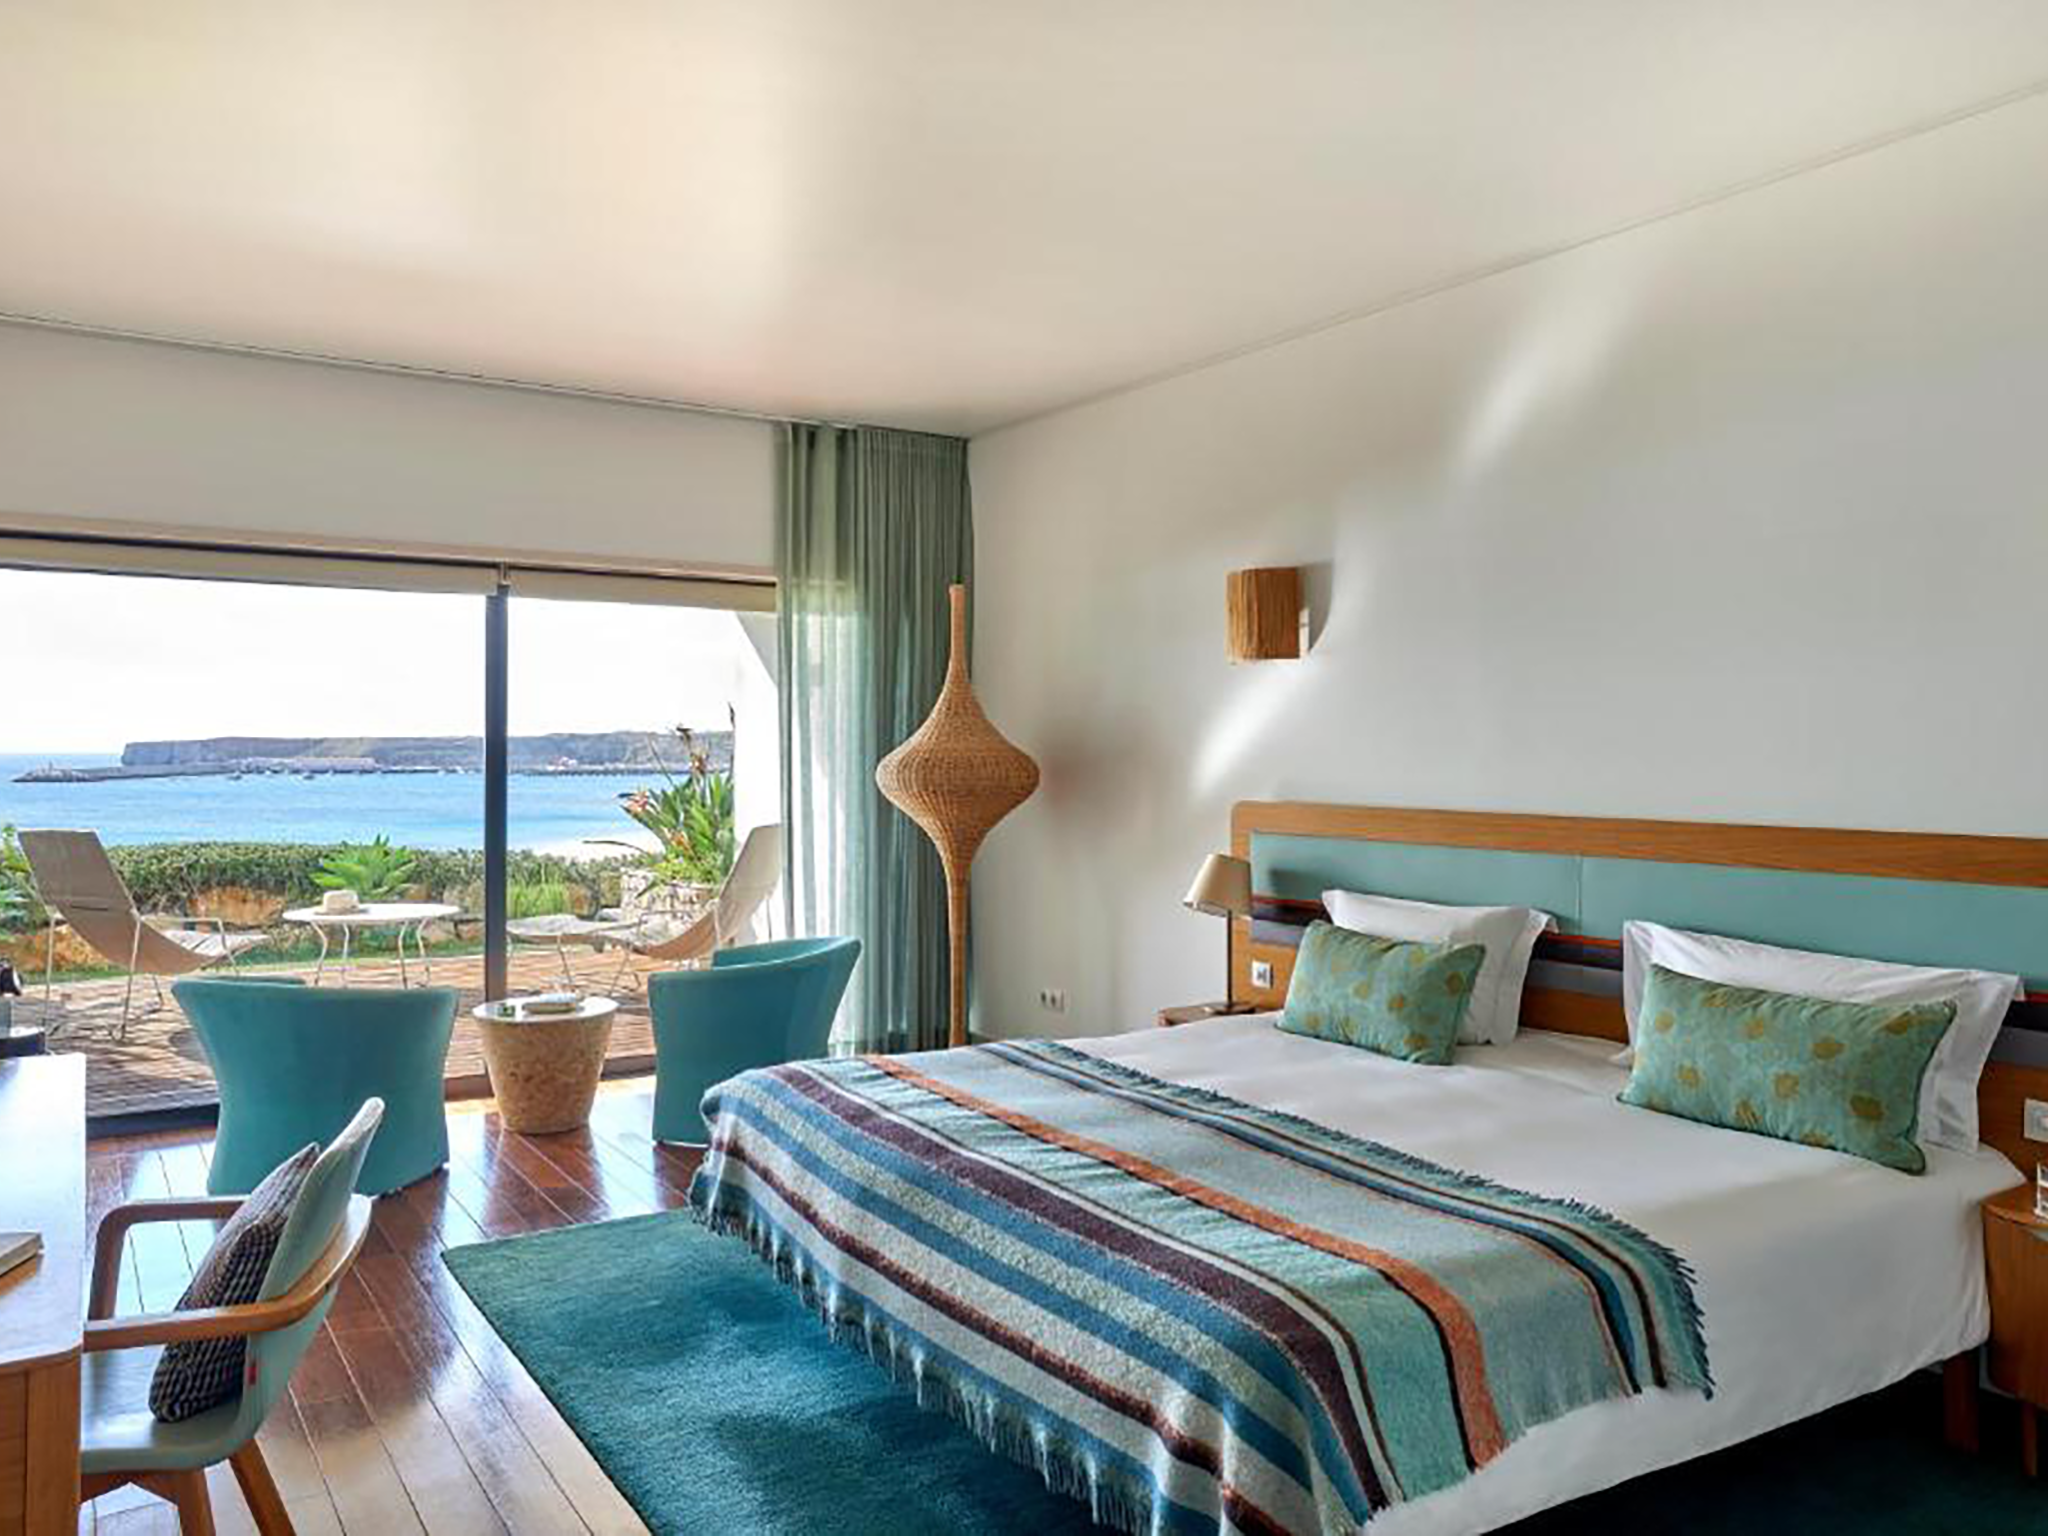 From hotel rooms to mega-villas, Martinhal hotel offers a range of stays